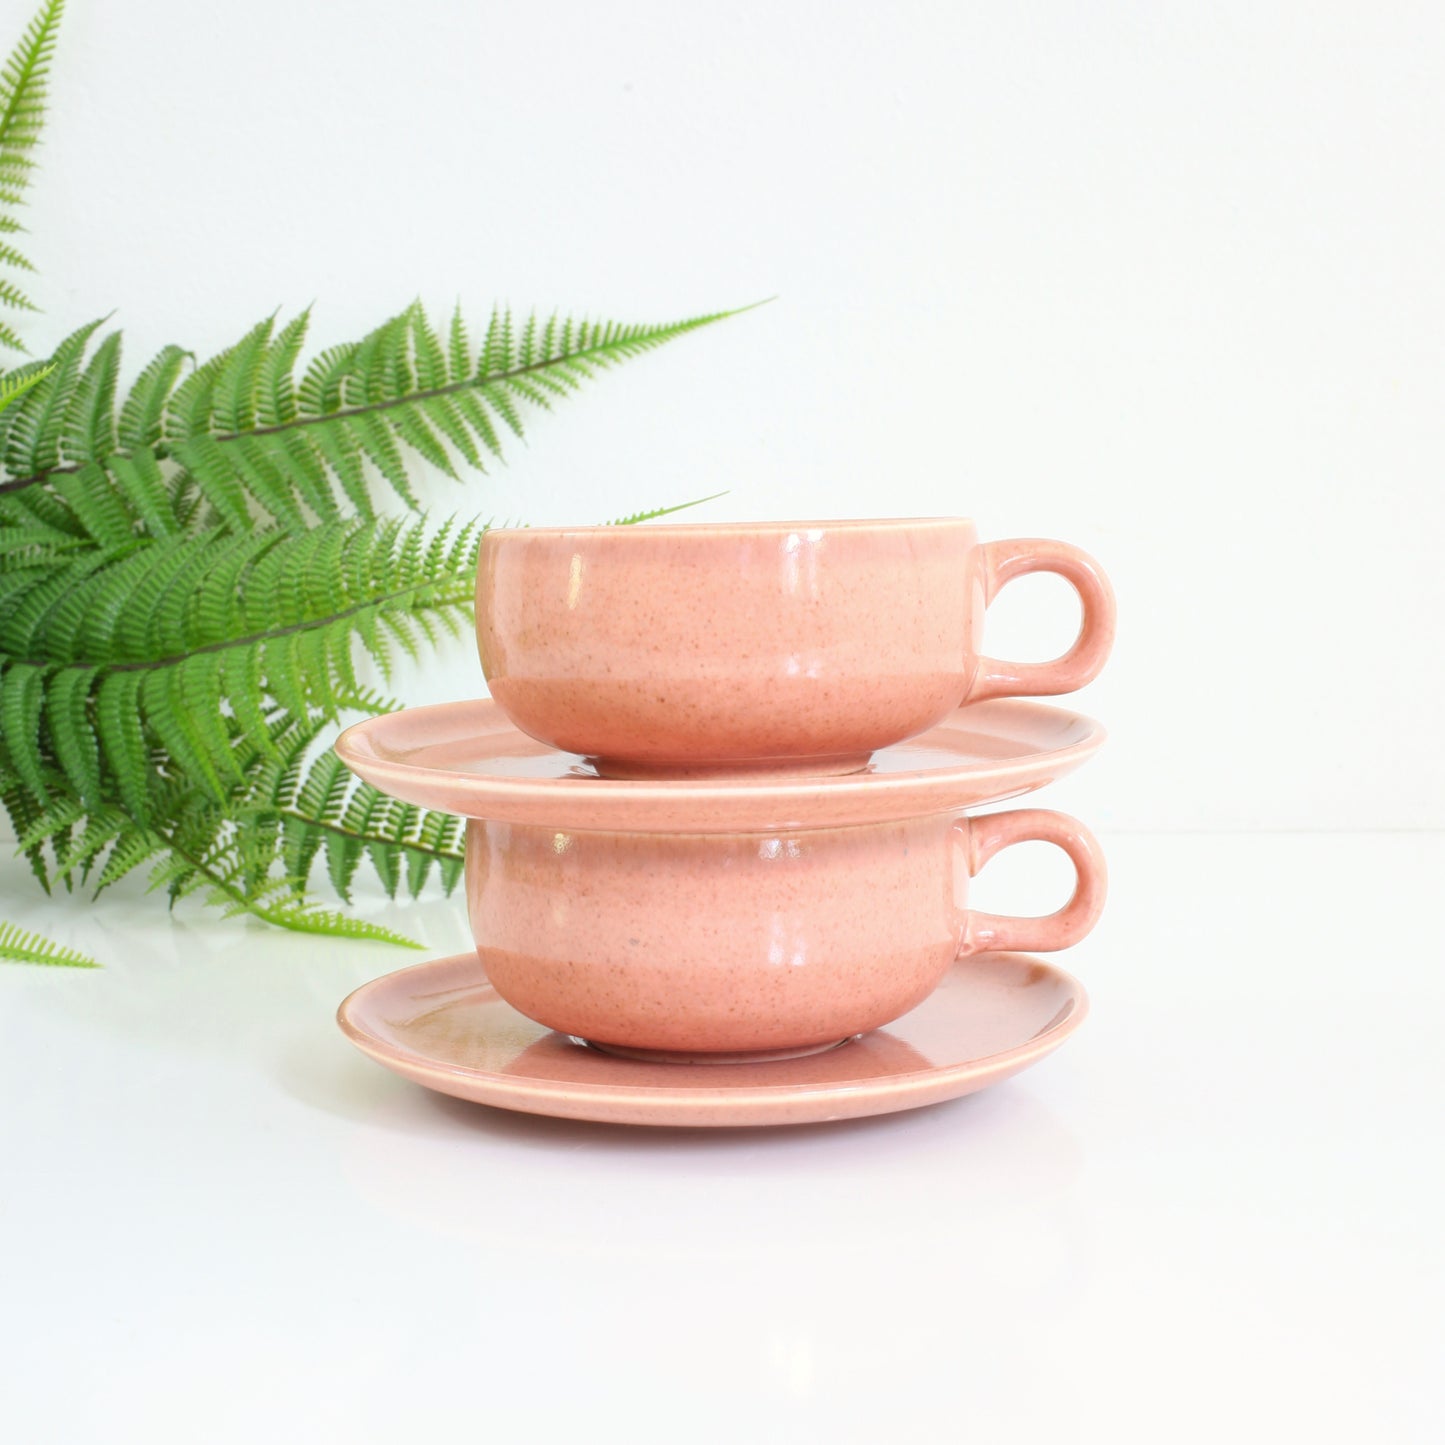 SOLD - Mid Century American Modern Coral Coffee Cups & Saucers by Russel Wright for Steubenville